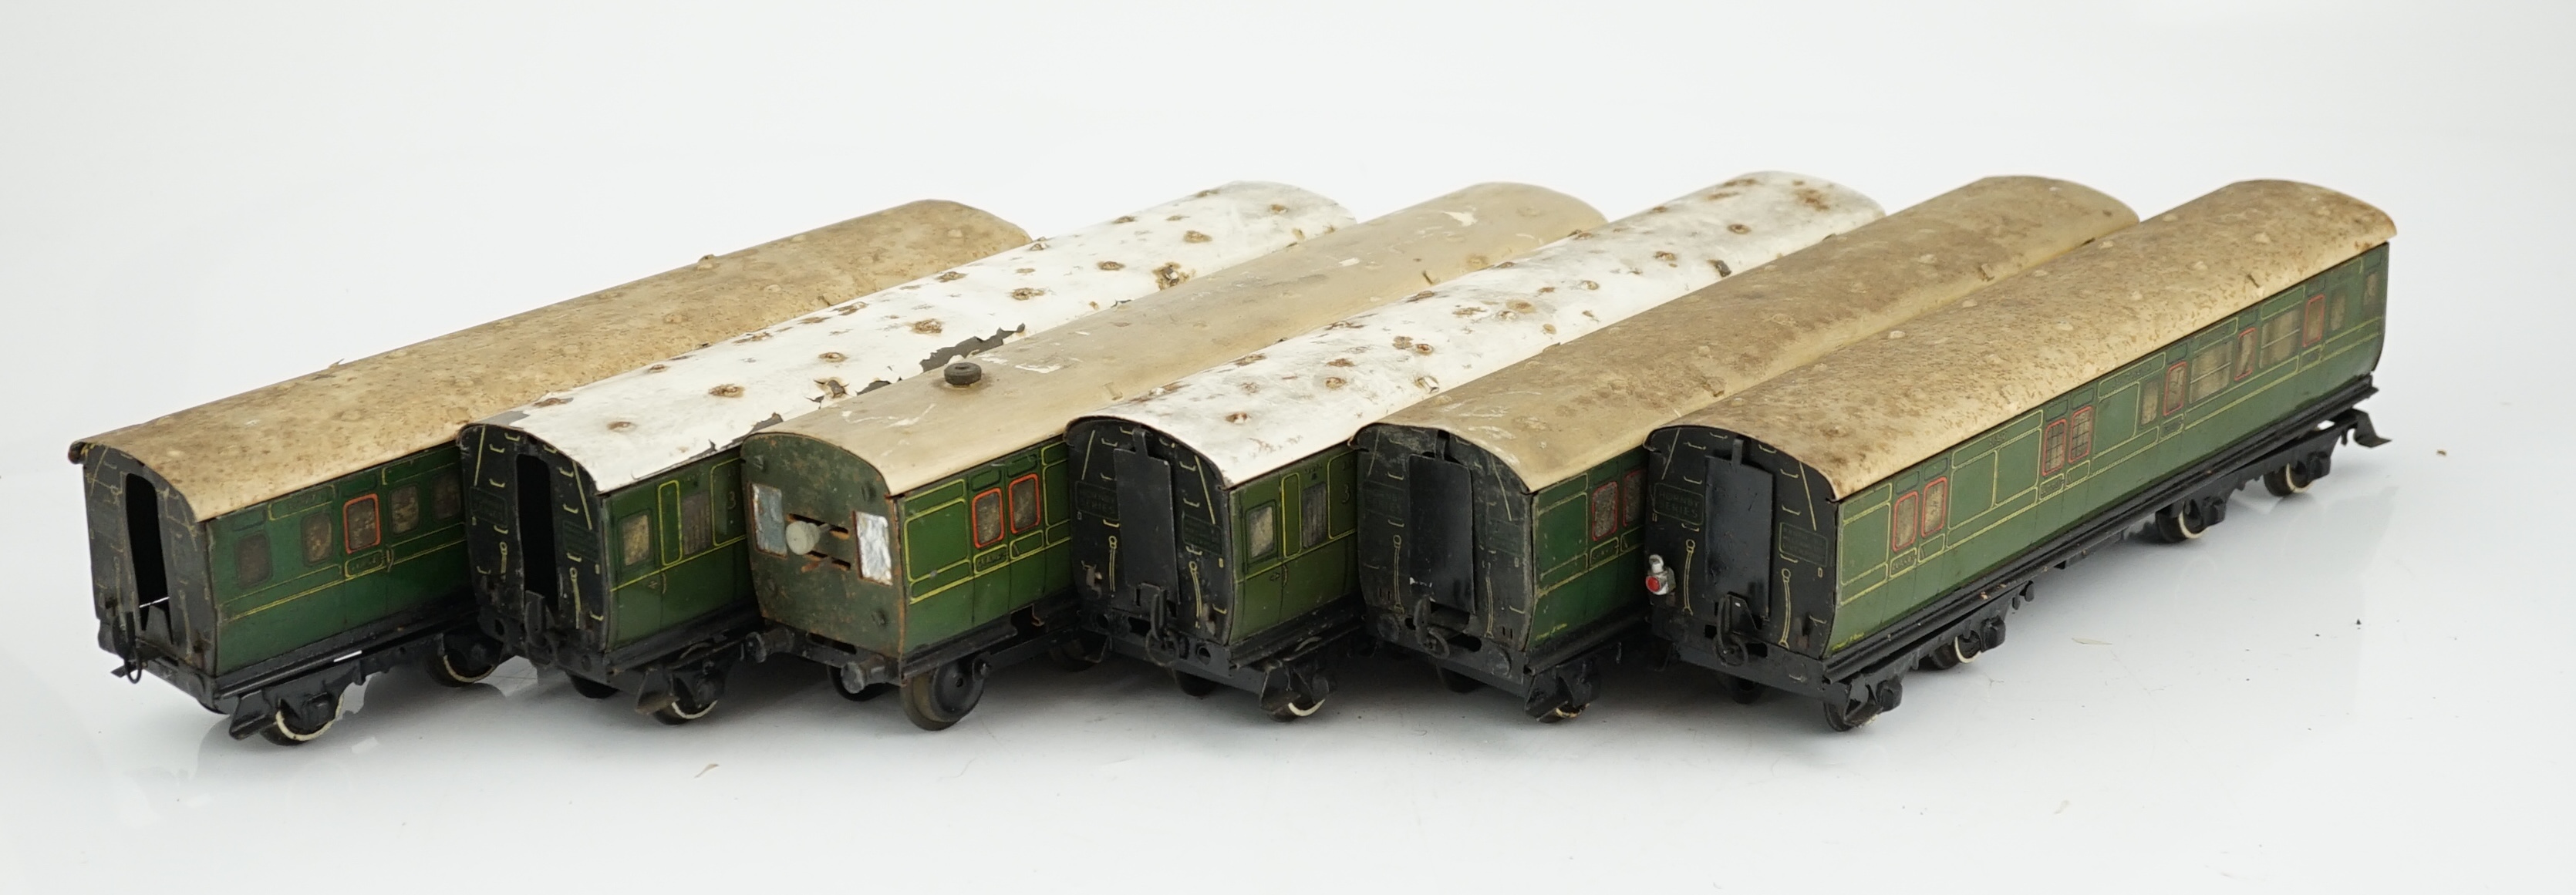 Six Hornby 0 gauge tinplate No.2 coaches in Southern Railway livery, one coach adapted to a - Image 7 of 12